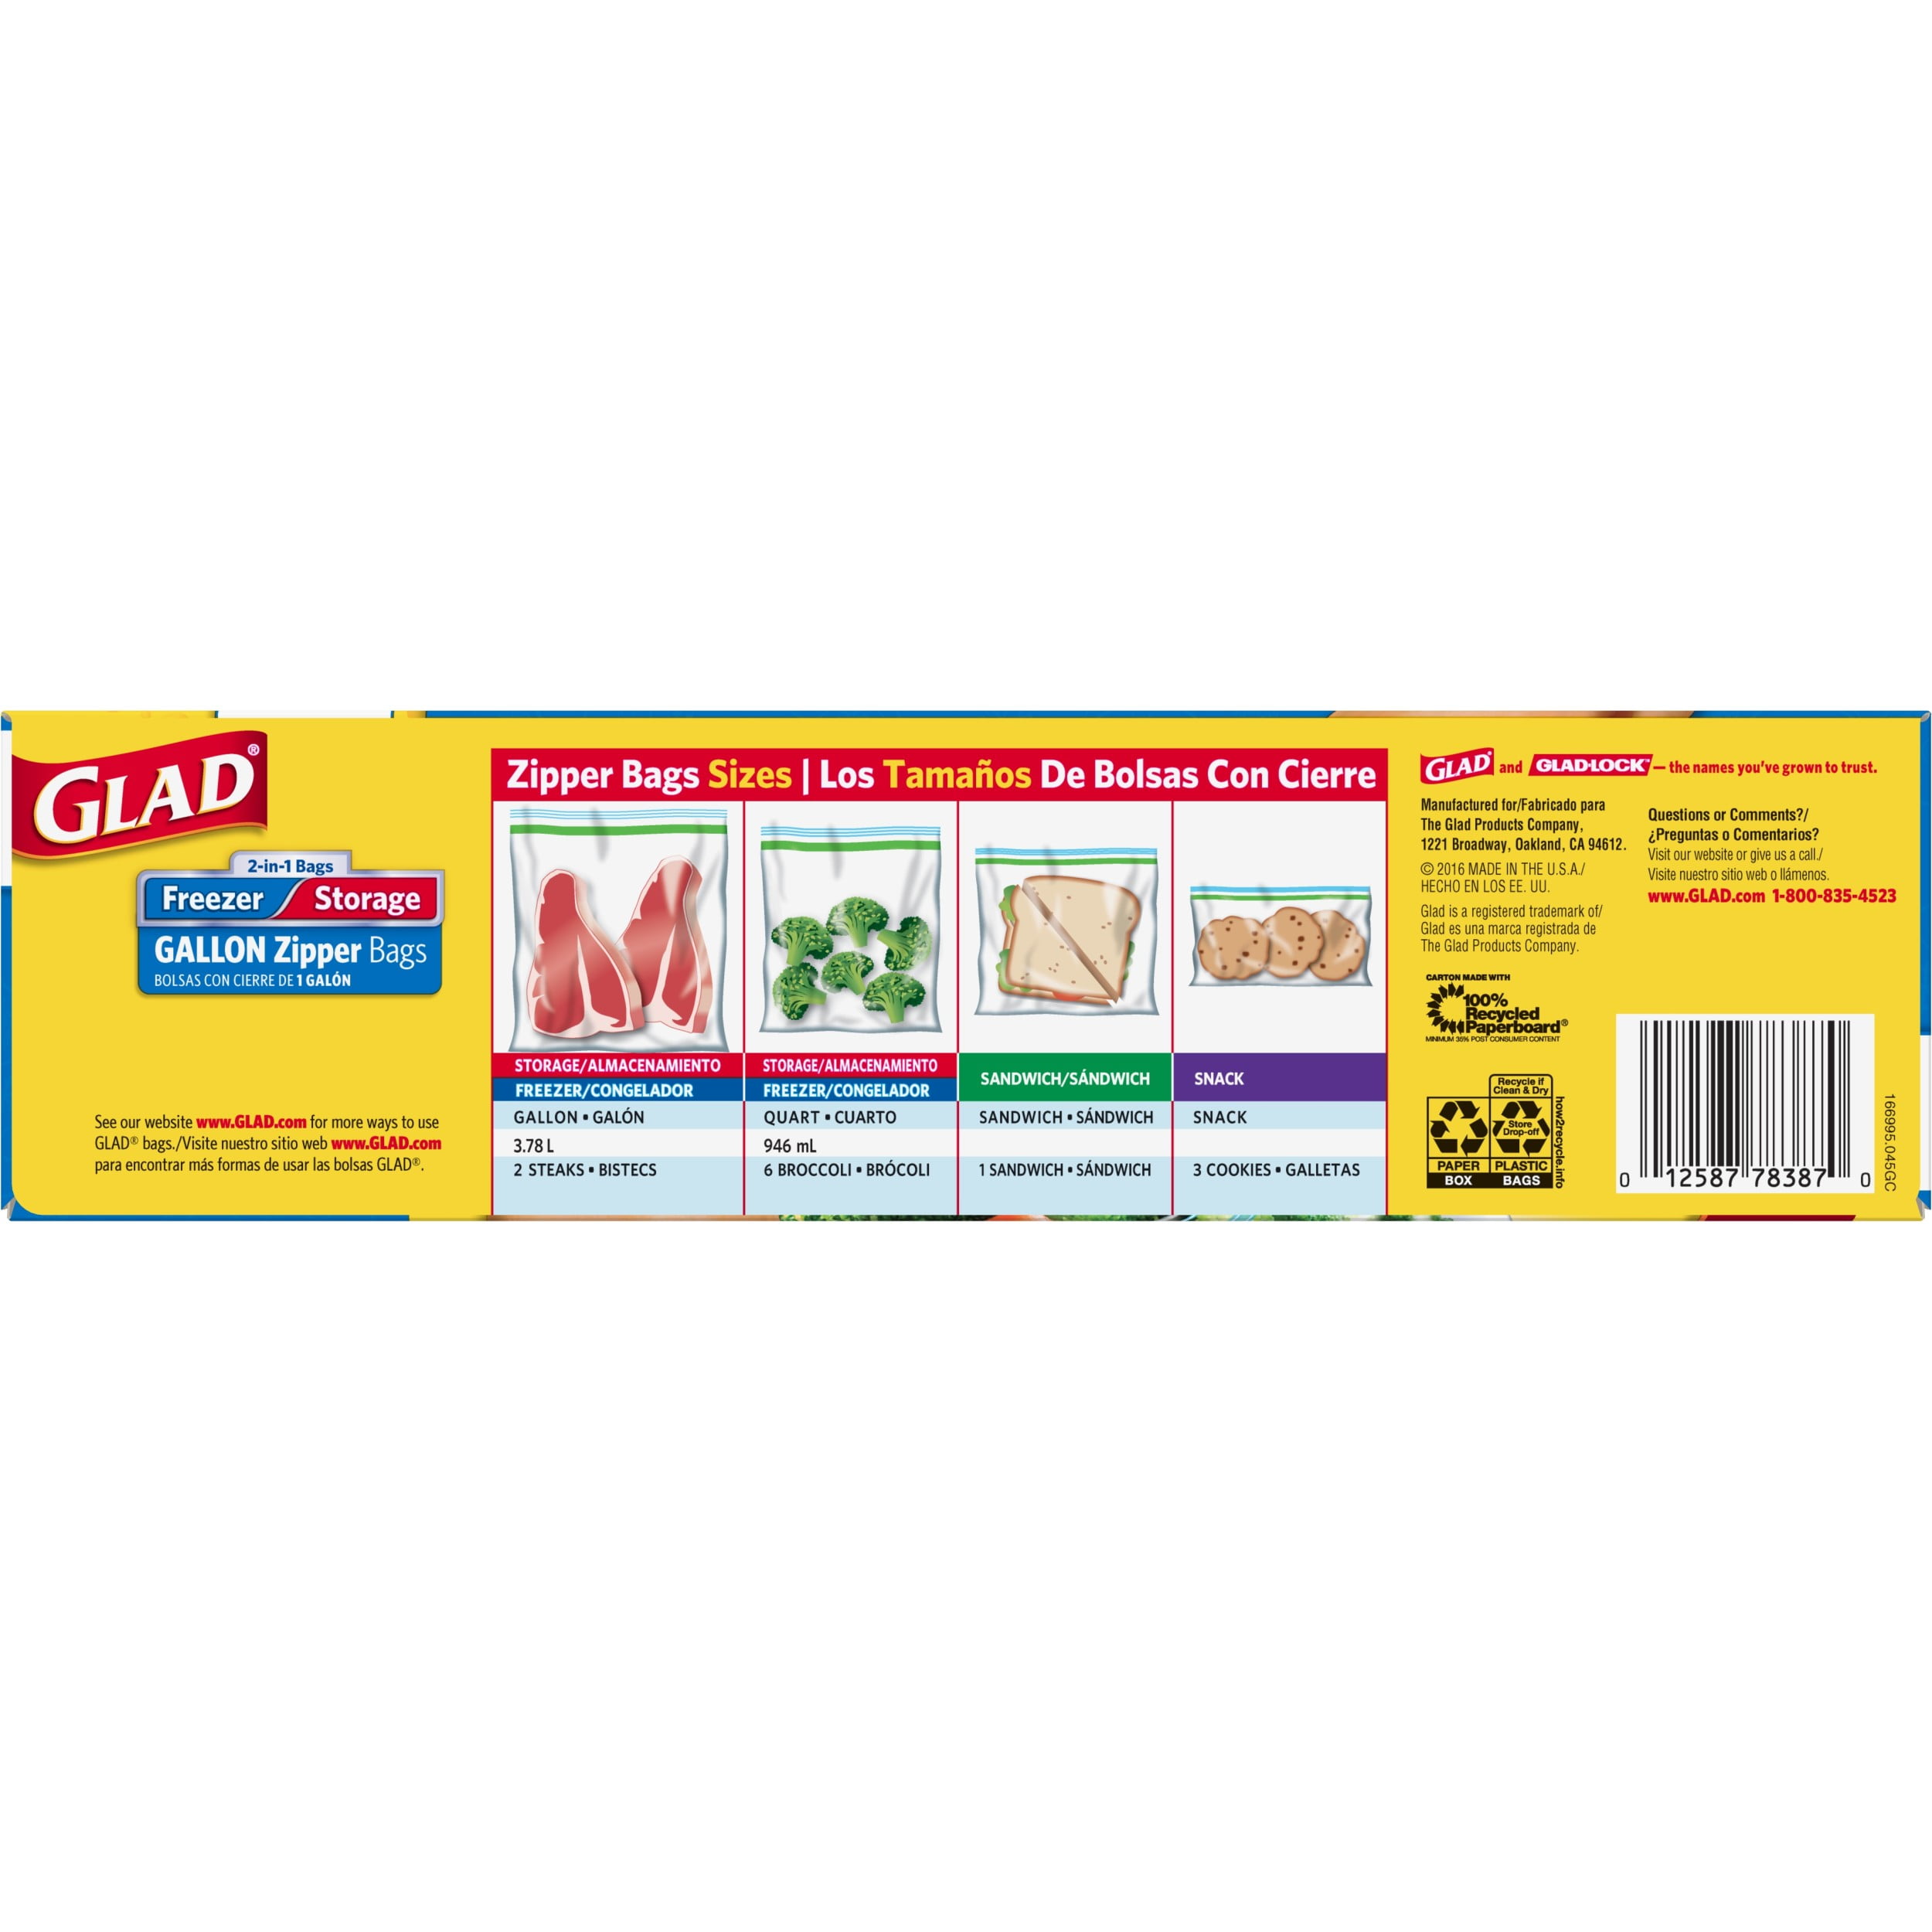 Glad Food Storage and Freezer 2 in 1 Zipper Bags - Gallon Size - 36 Count 